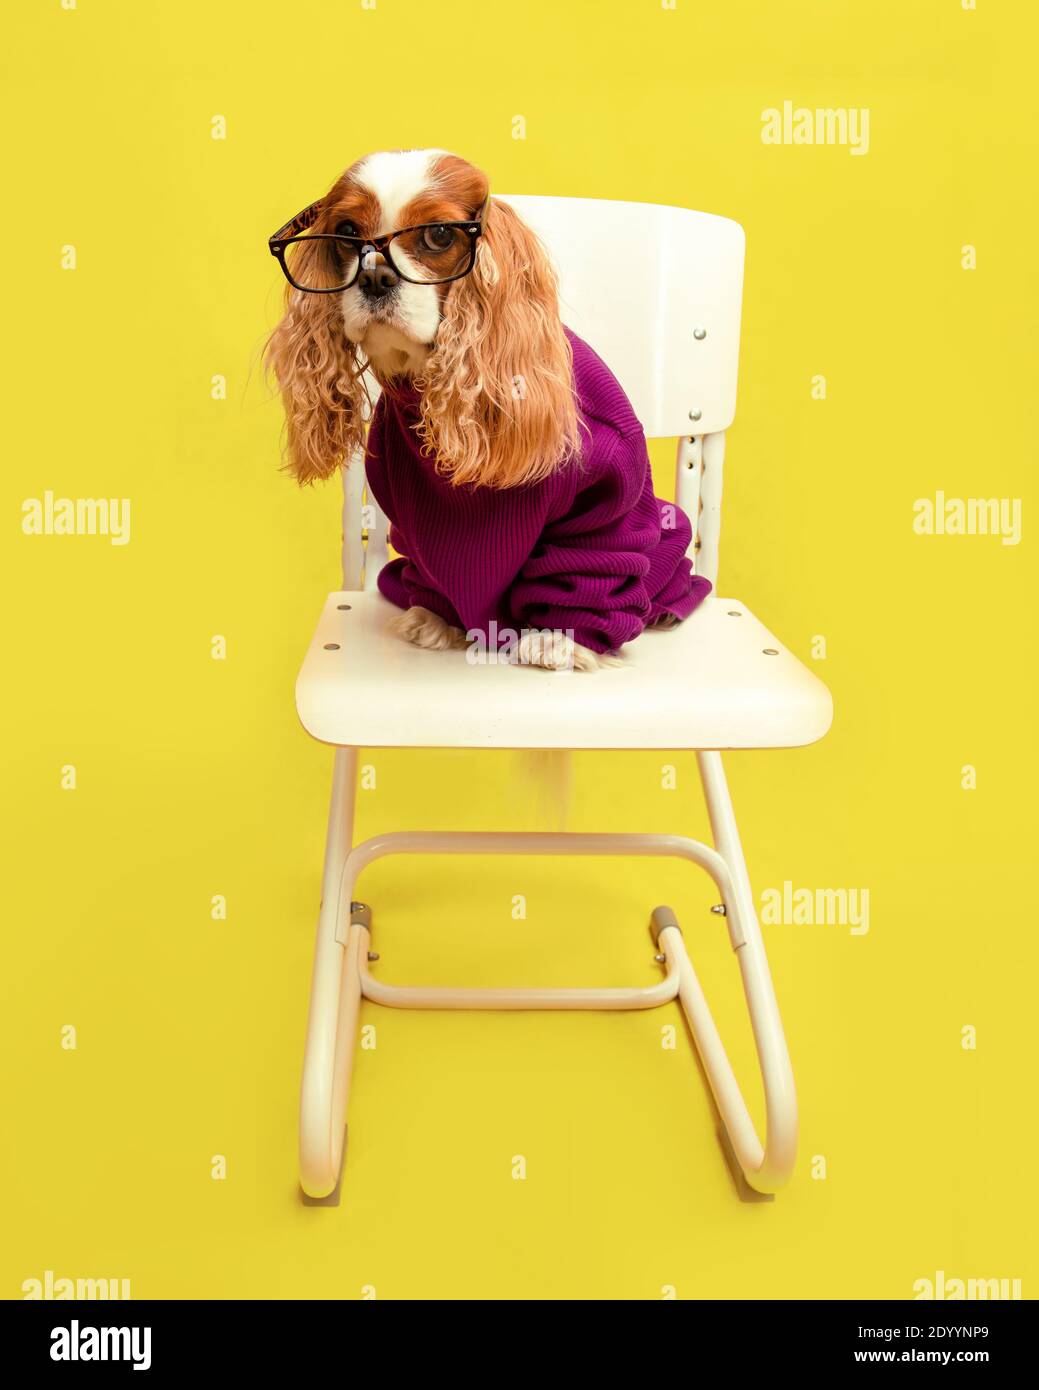 Dog professor sit on chair with glasses and sweater and looking at camera in studio on yellow background. Humor photo. Stock Photo